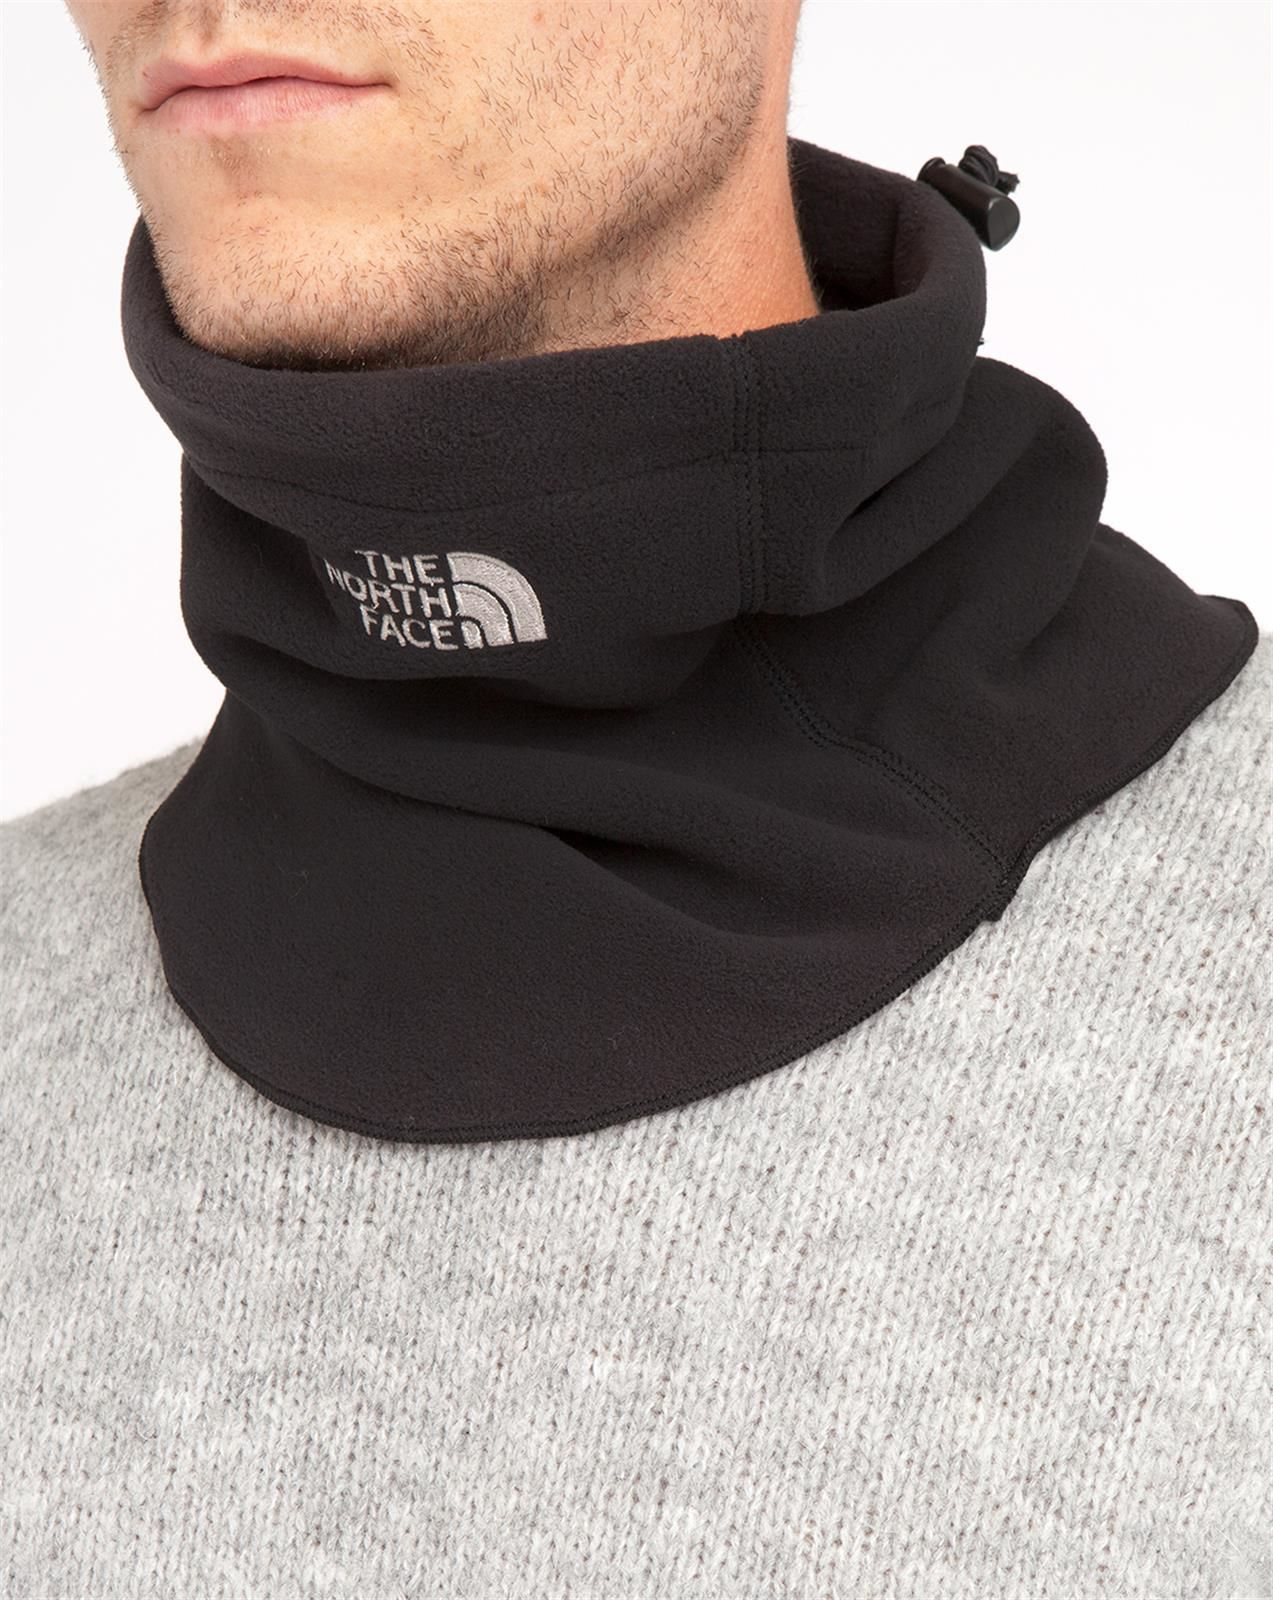 north face scarf mens